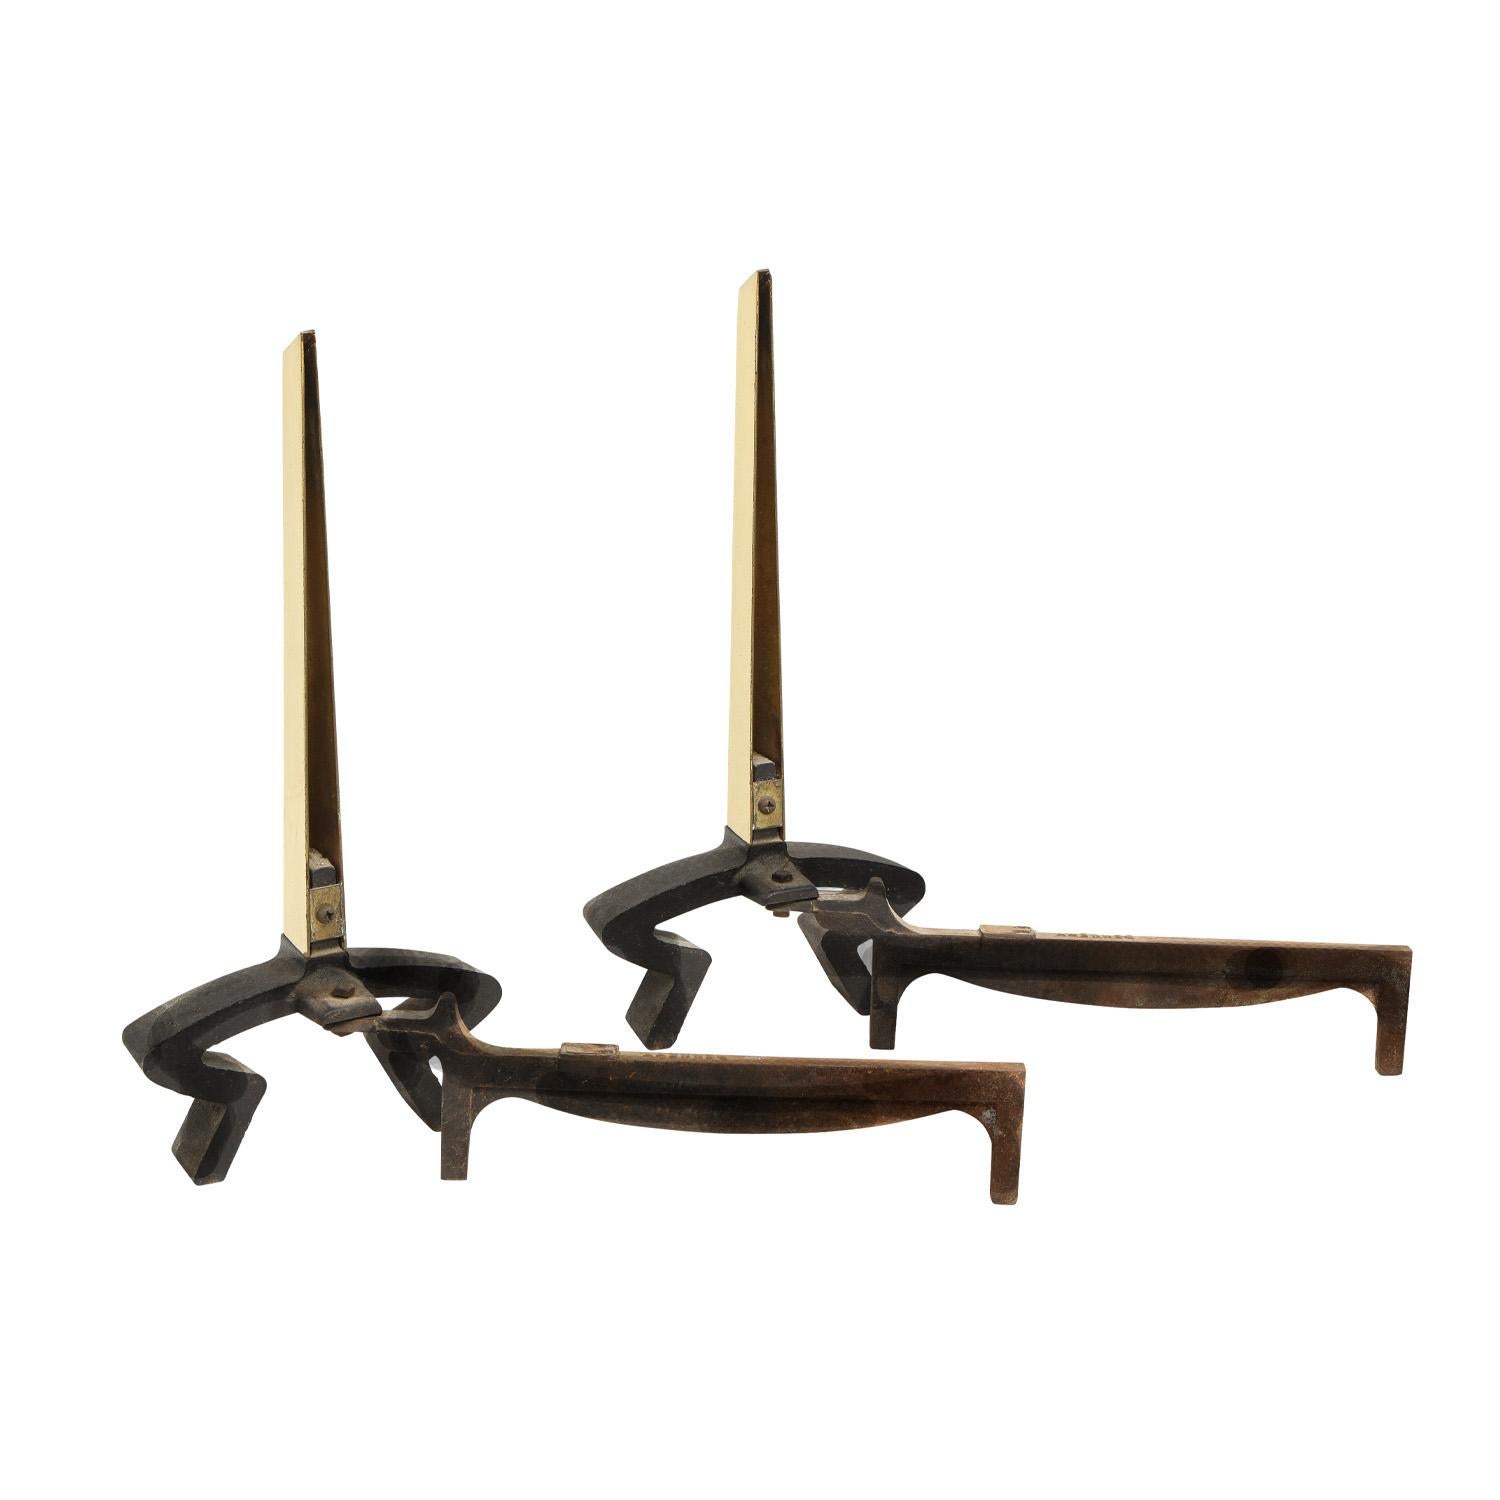 American Donald Deskey Pair of Andirons in Wrought Iron and Brass 1950s (Signed) For Sale